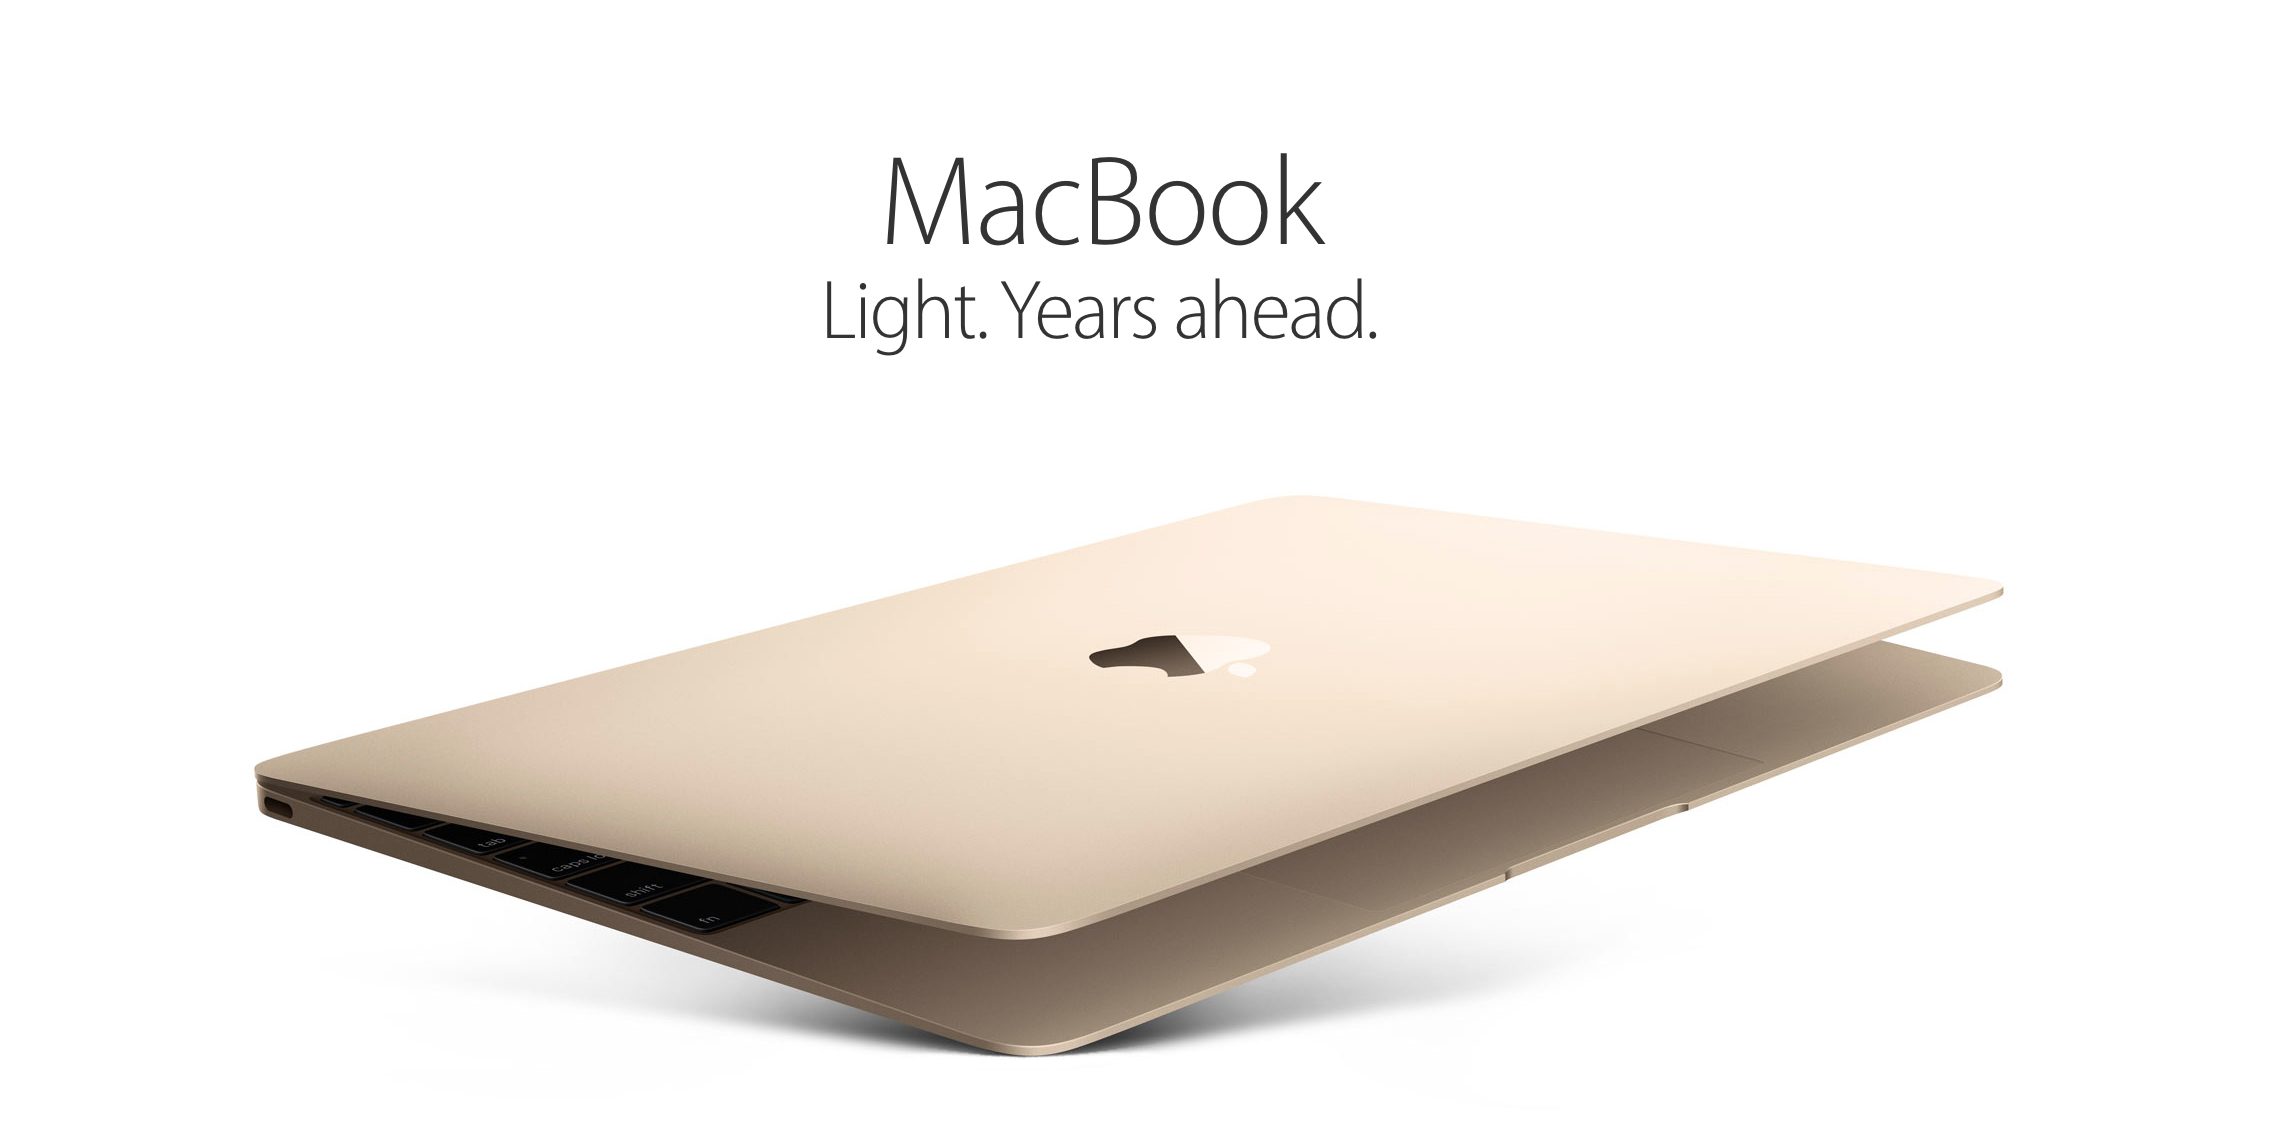 12-inch MacBook discontinued with no replacement - 9to5Mac